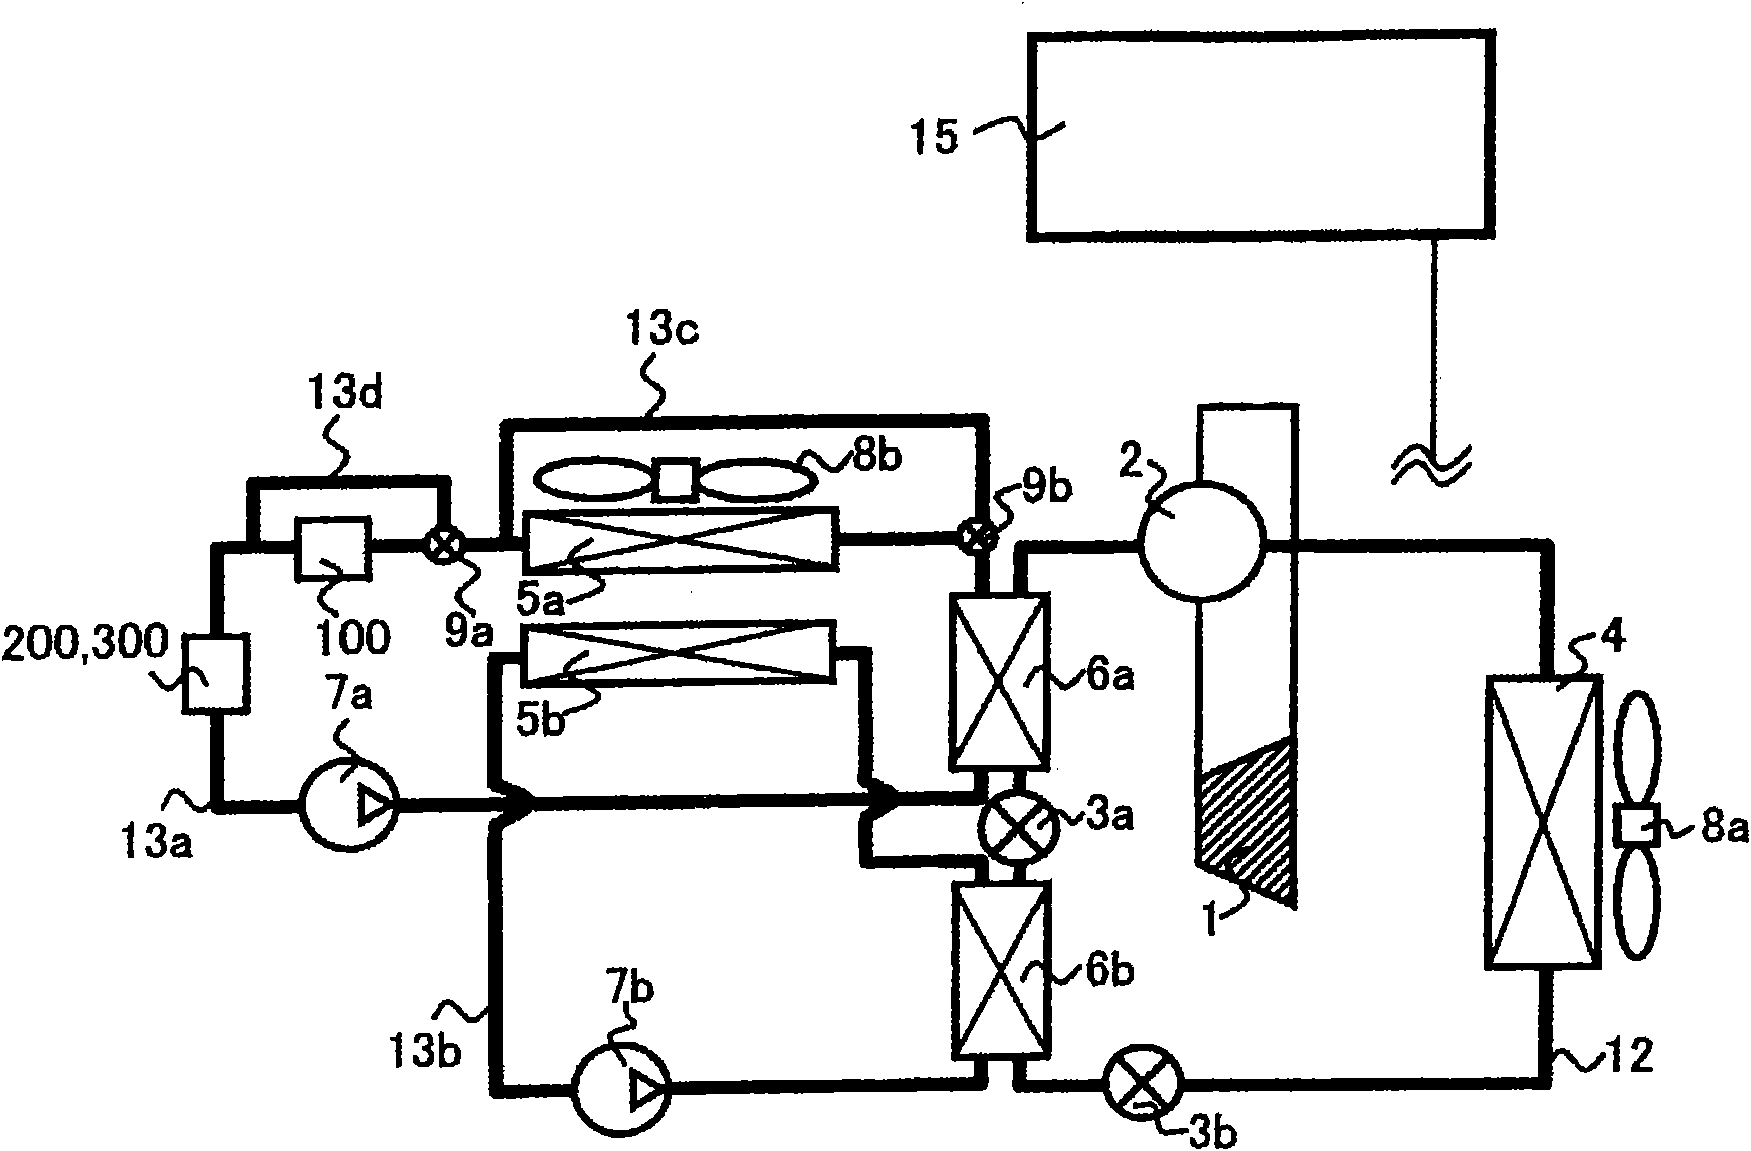 Thermodynamic cycle system for a vehicle